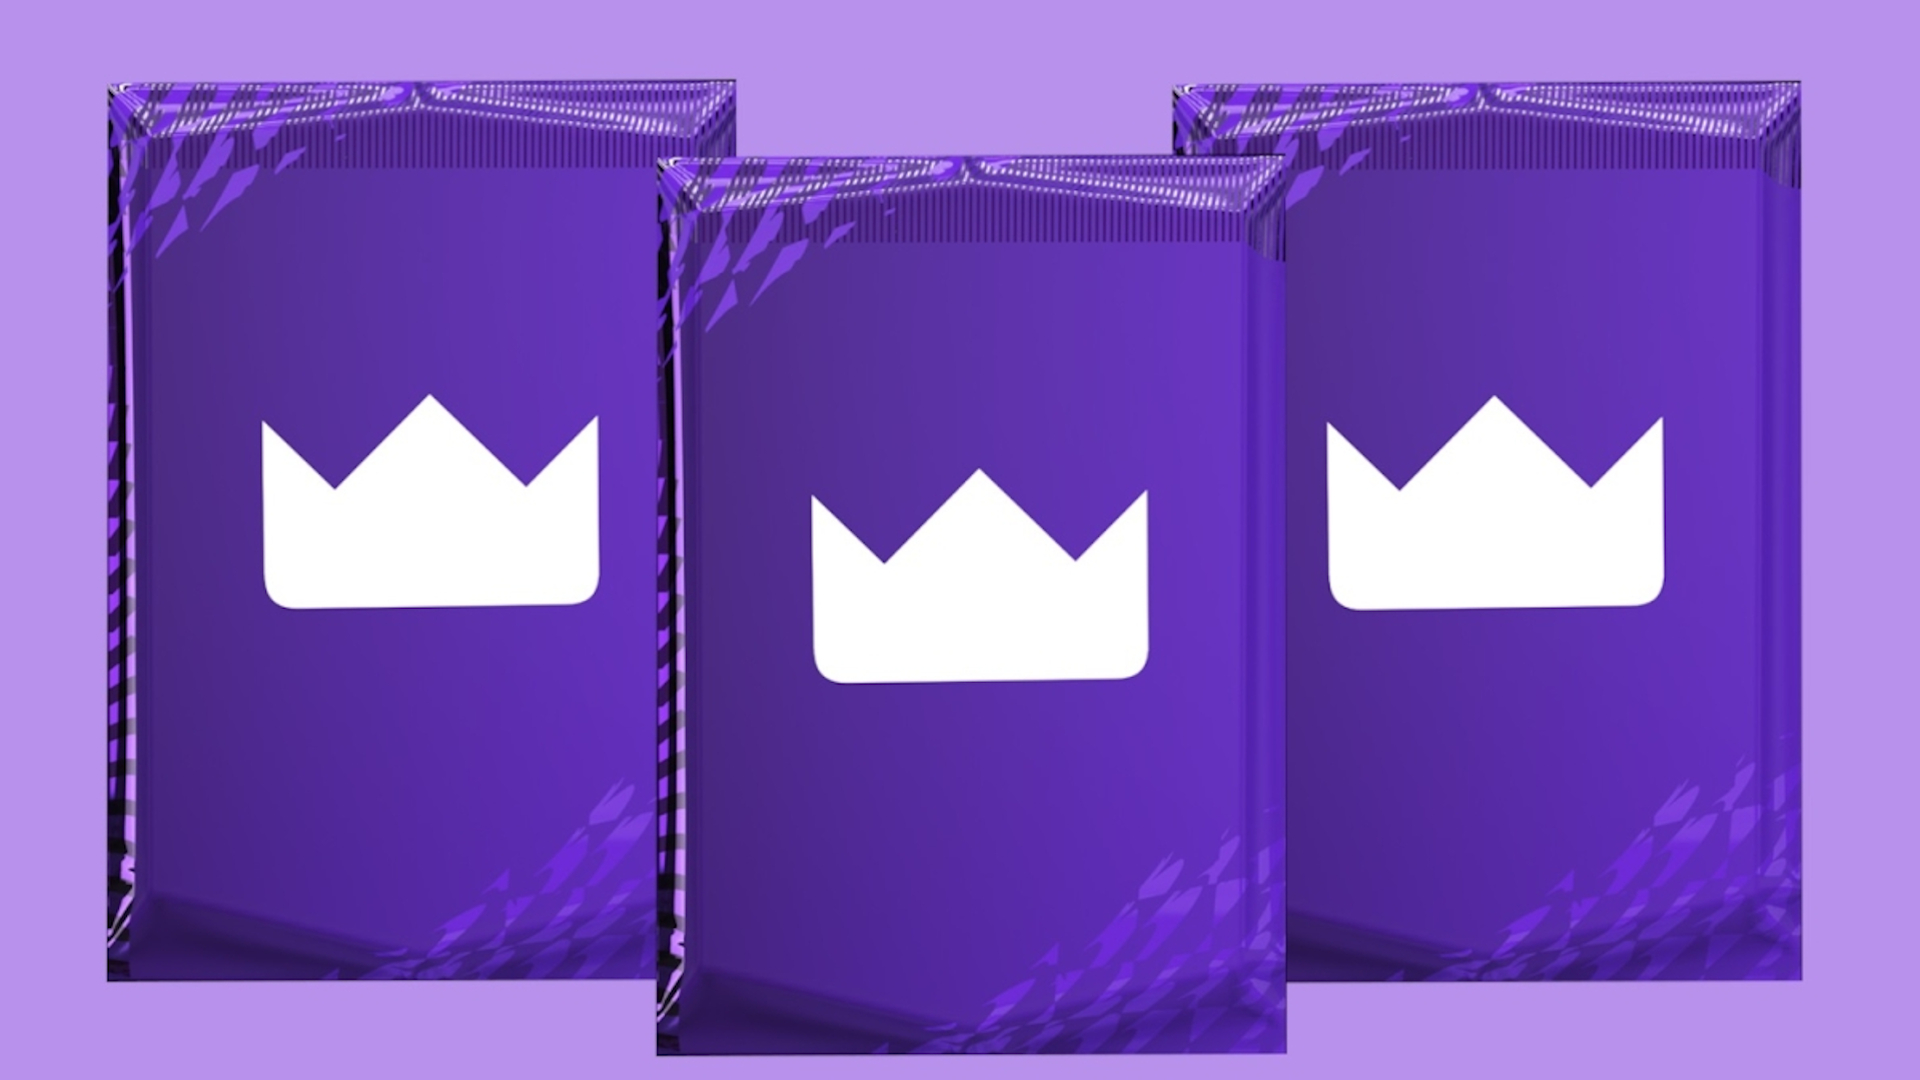 Get exclusive Twitch Sings loot with Twitch Prime